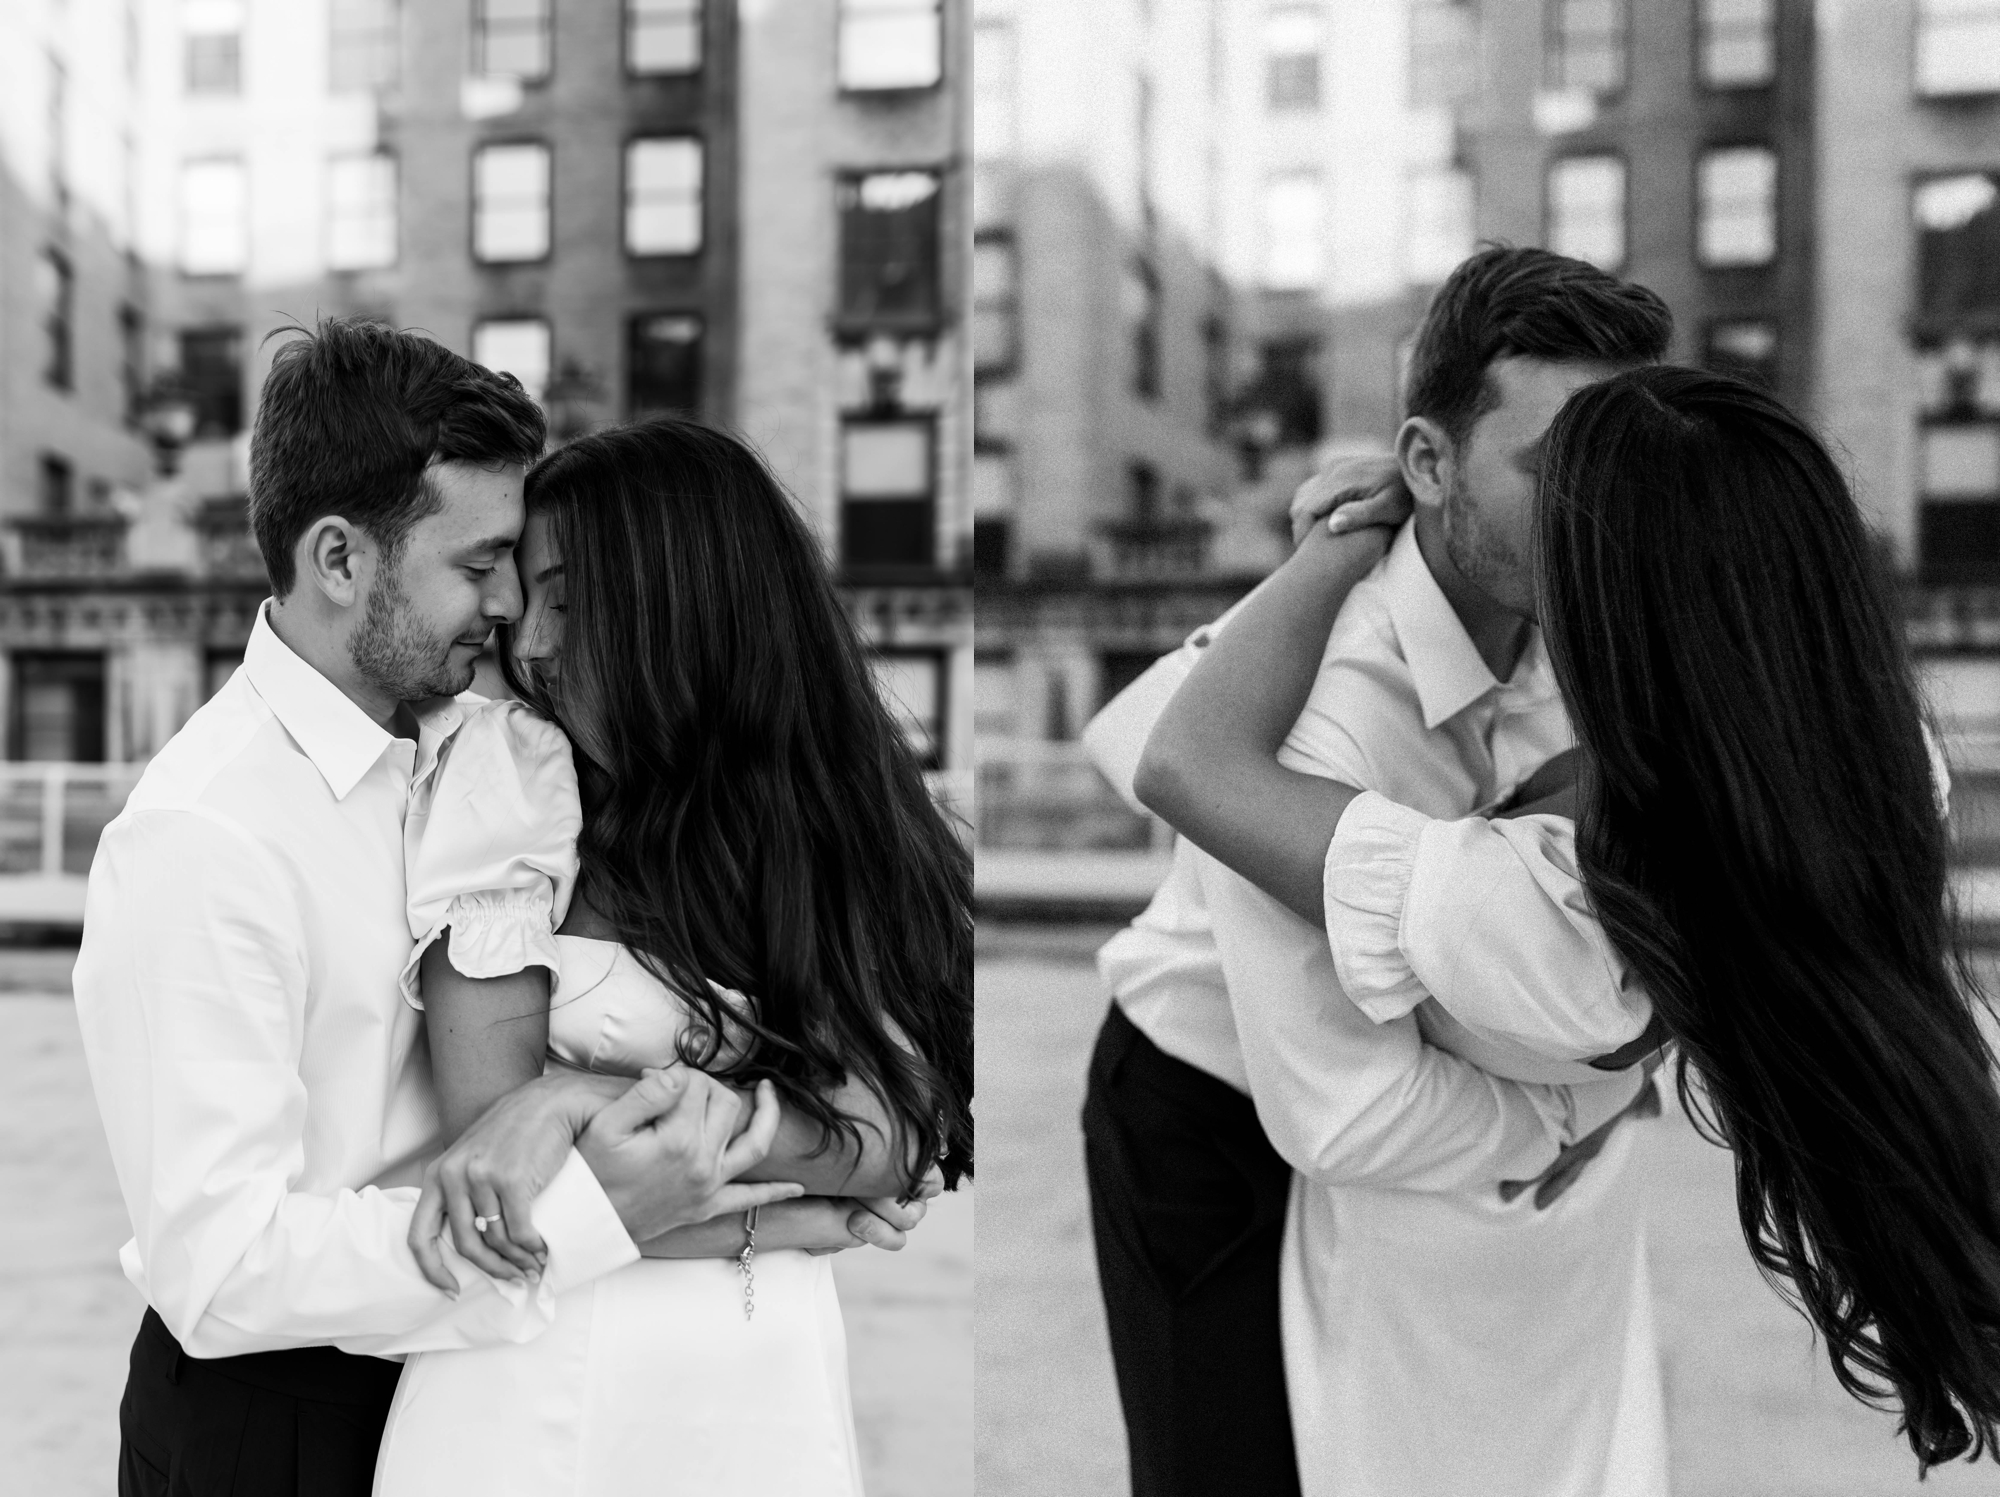 engagement photo ideas by Rachel Wehan Photography